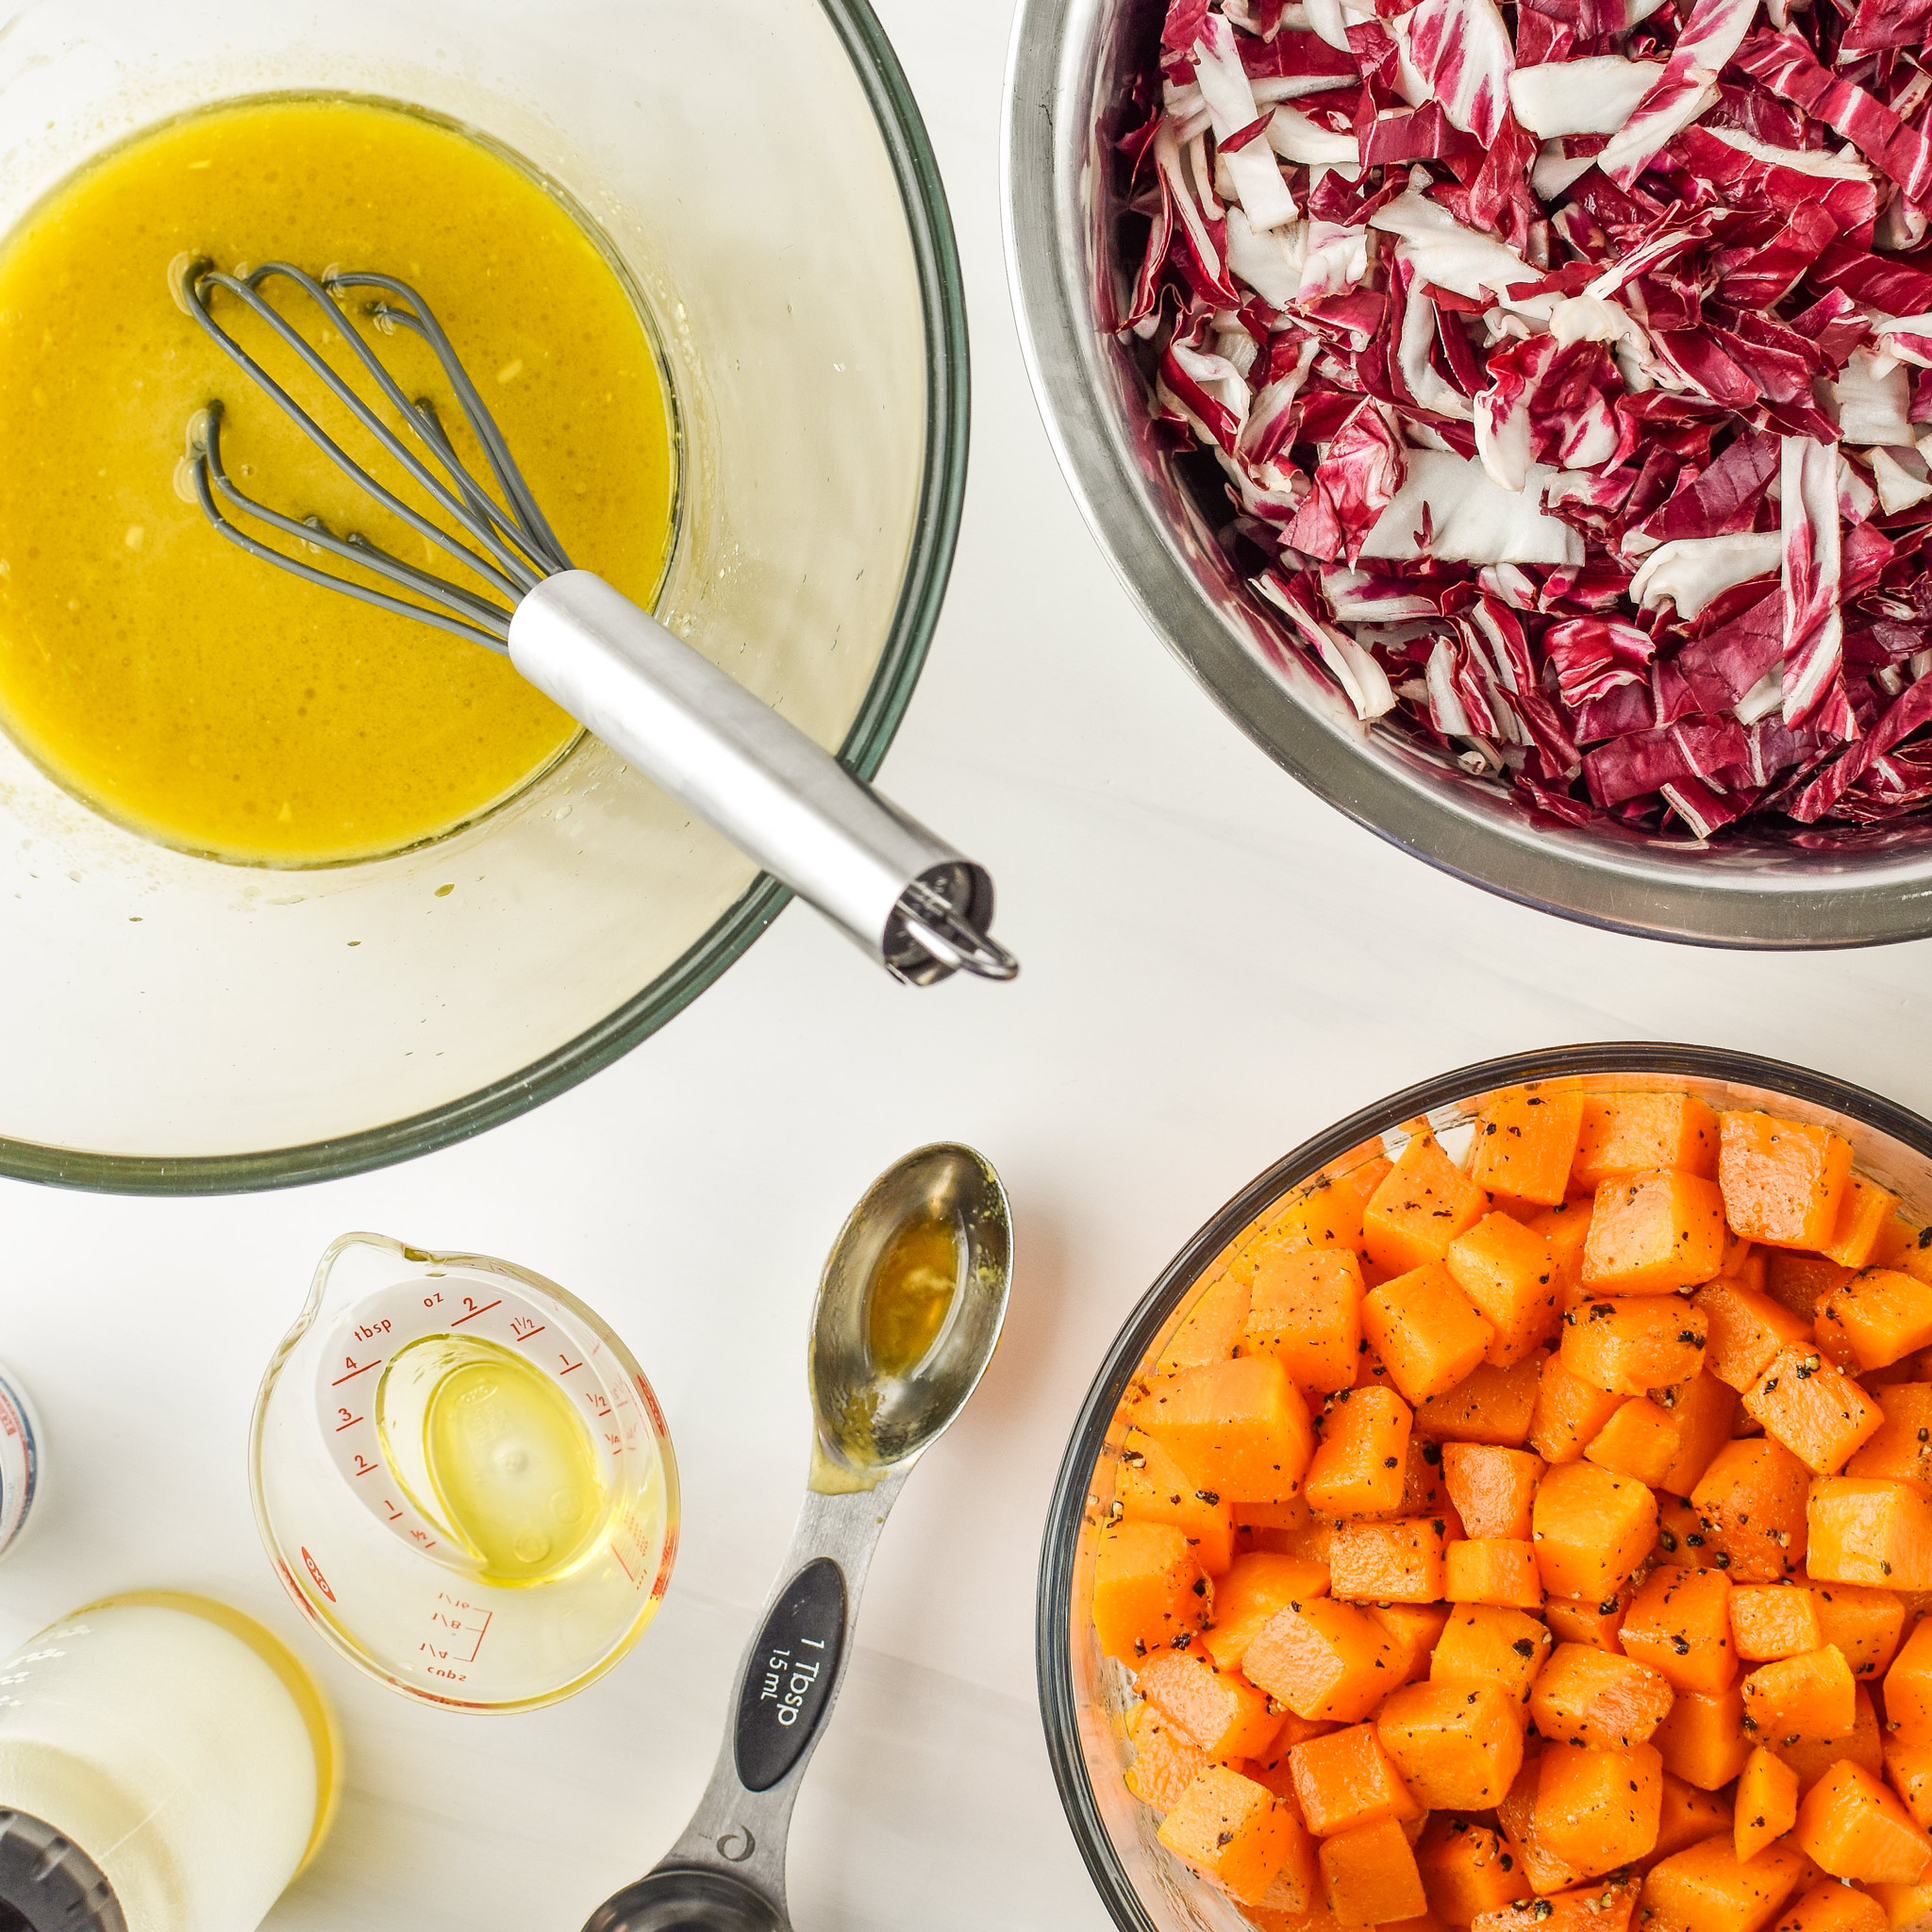 All of the ingredients for the Radicchio and Roasted Squash Salad